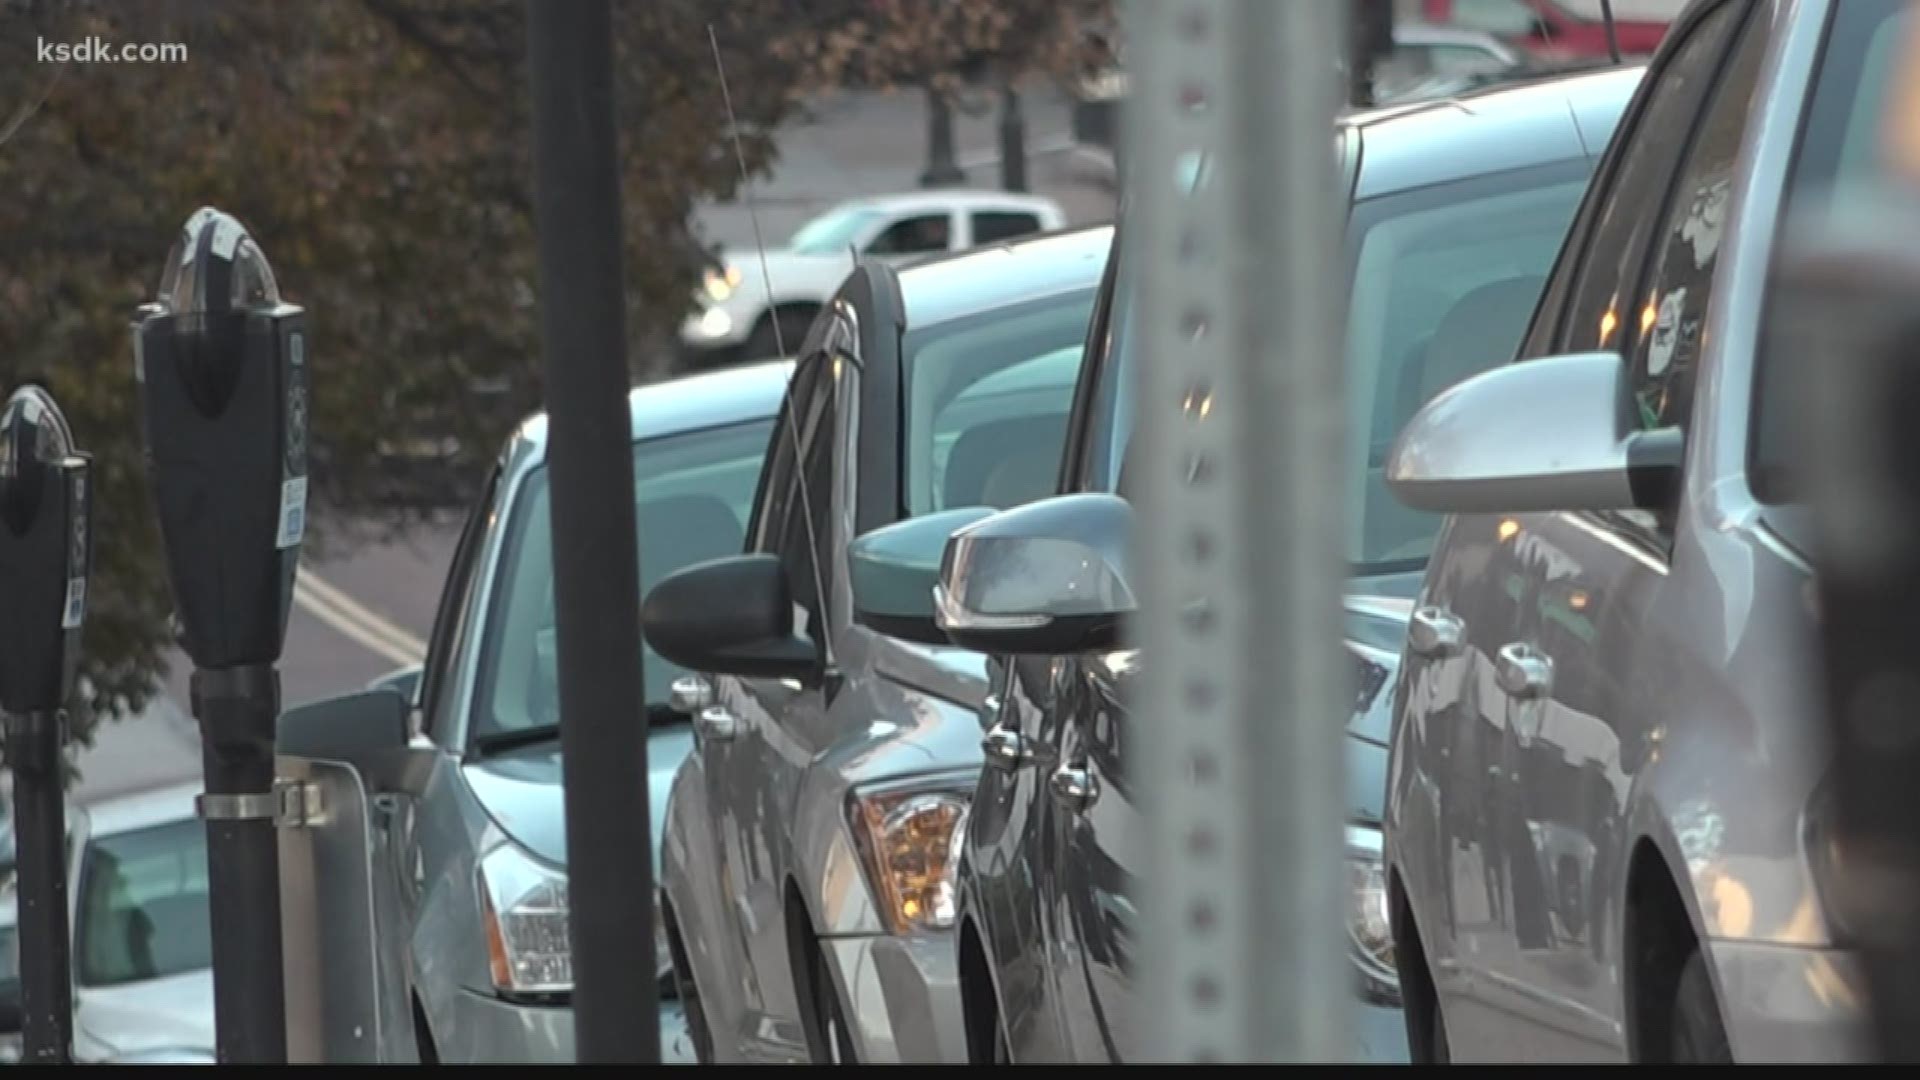 Police say most of the crimes are preventable by locking your doors and cars.